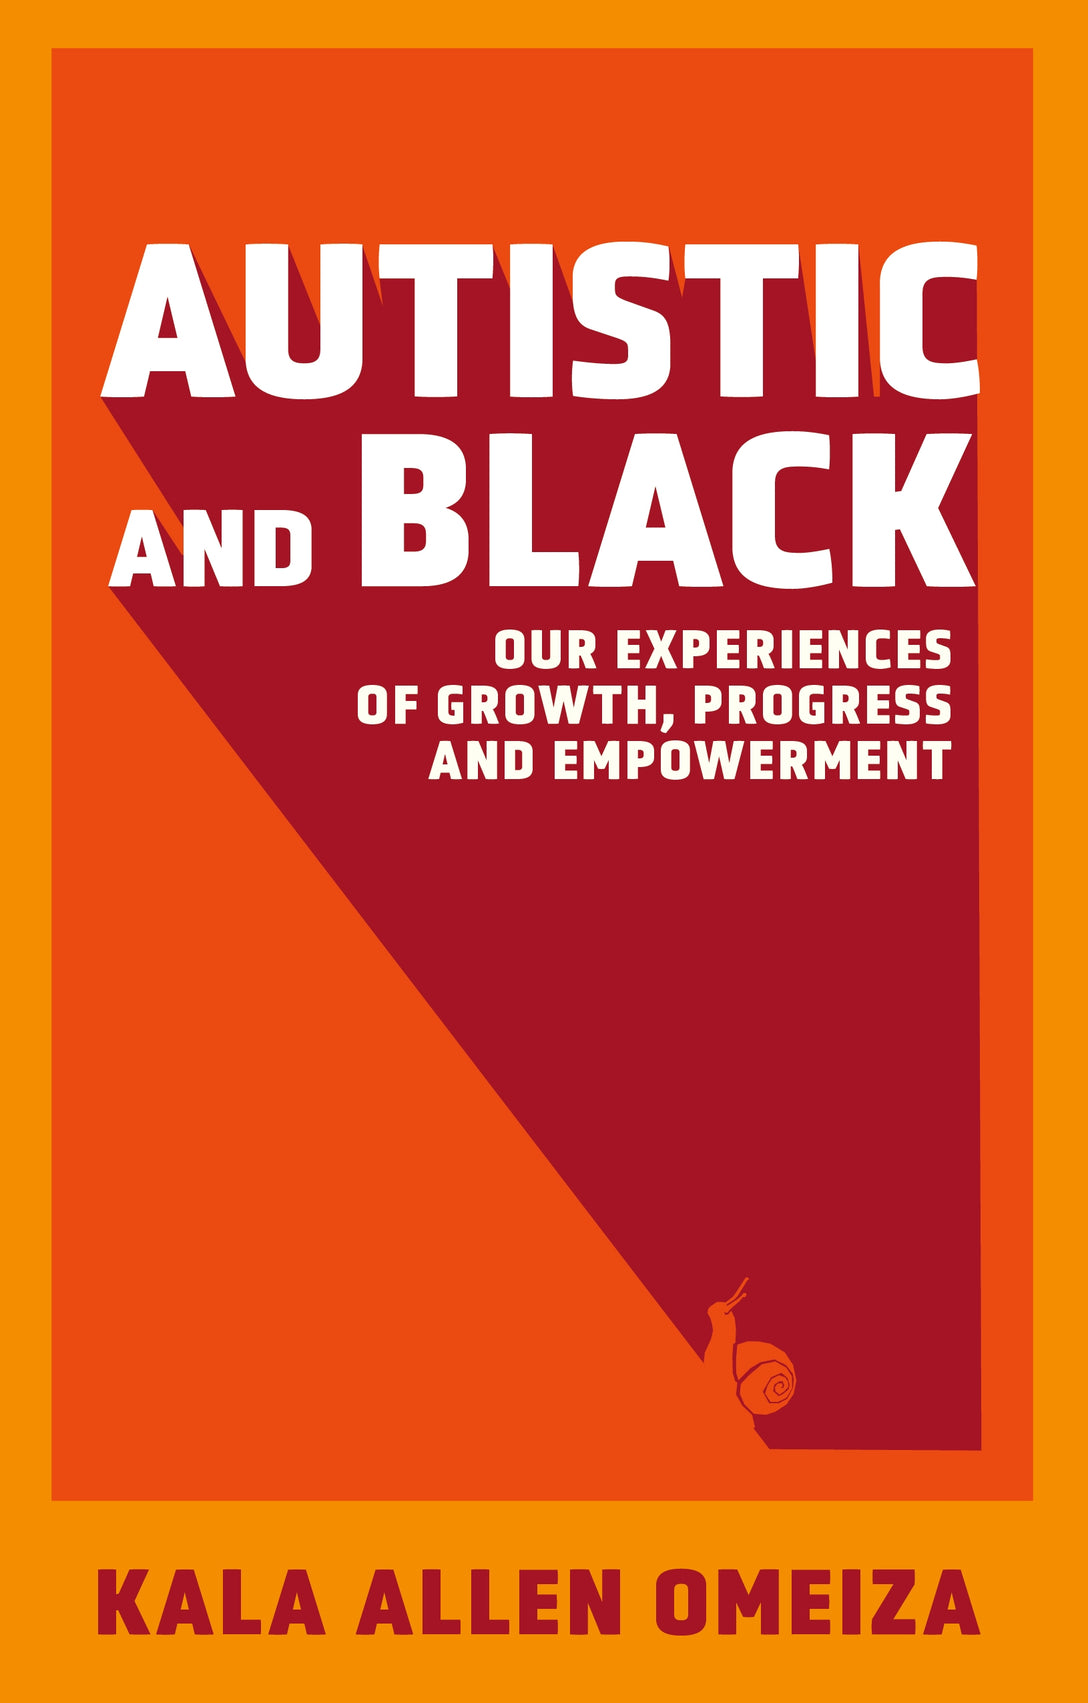 Autistic and Black by Kala Allen Omeiza